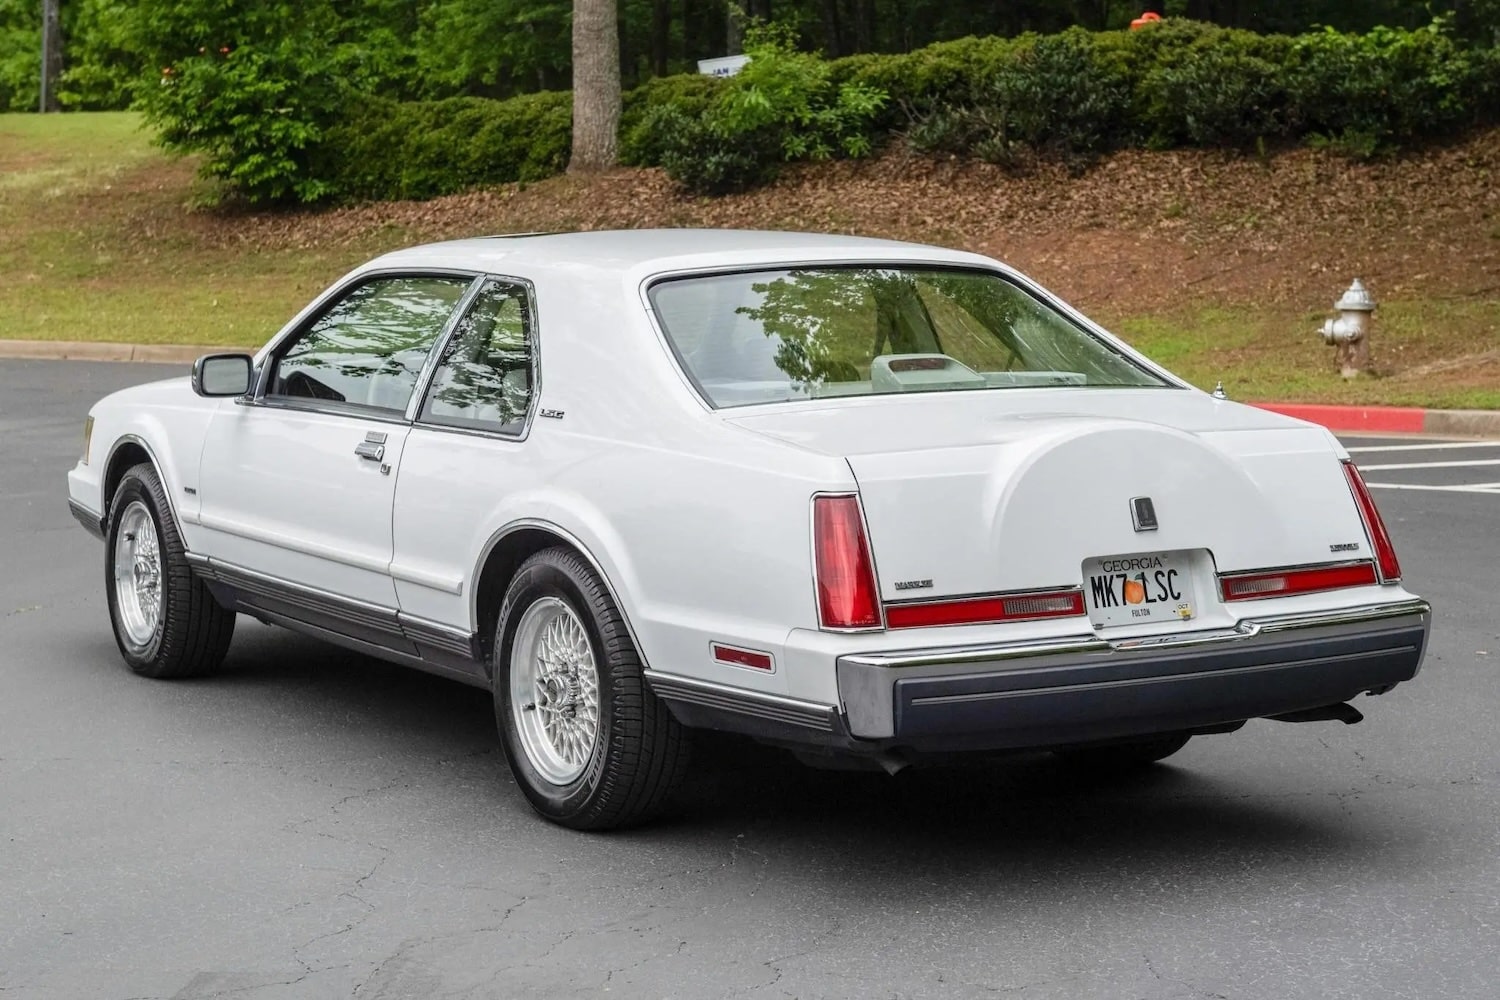 1991 Lincoln Mark VII LSC With Just 43K Miles Up For Auction